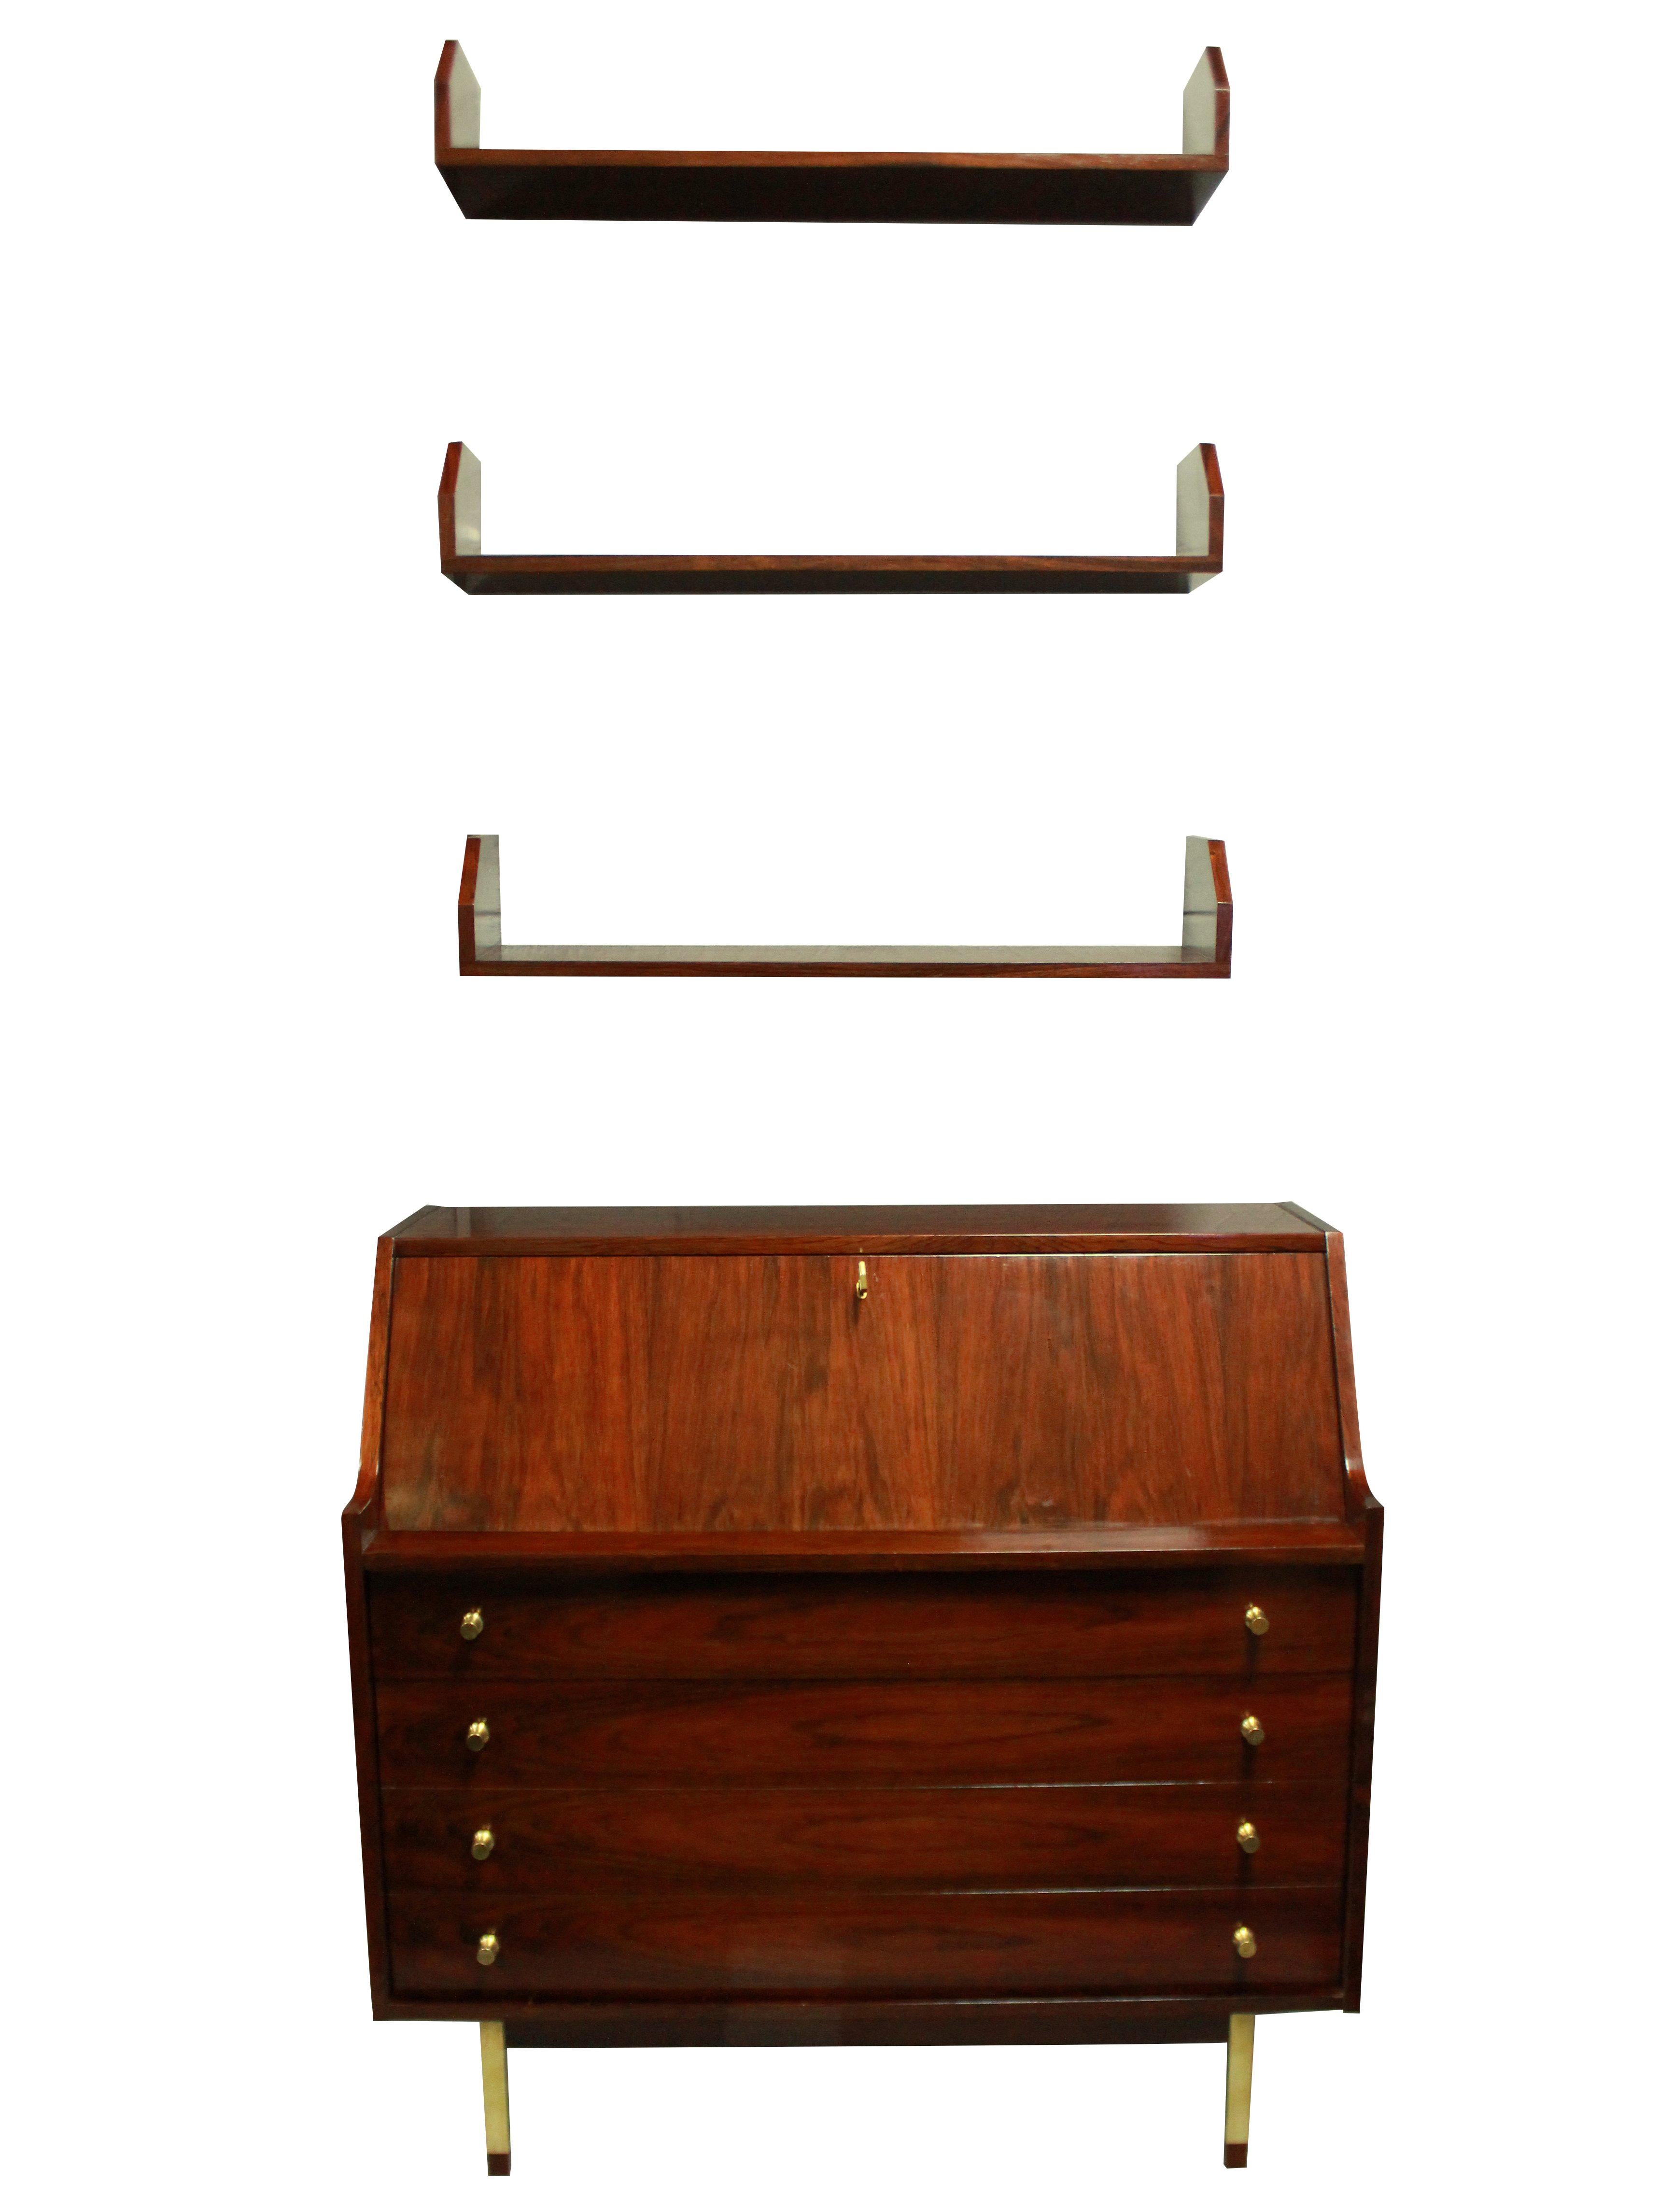 An Italian secrétaire with three wall shelves by Gianfranco Frattini for Bernini. In rosewood veneer, with brass handles and key and brushed gold legs.